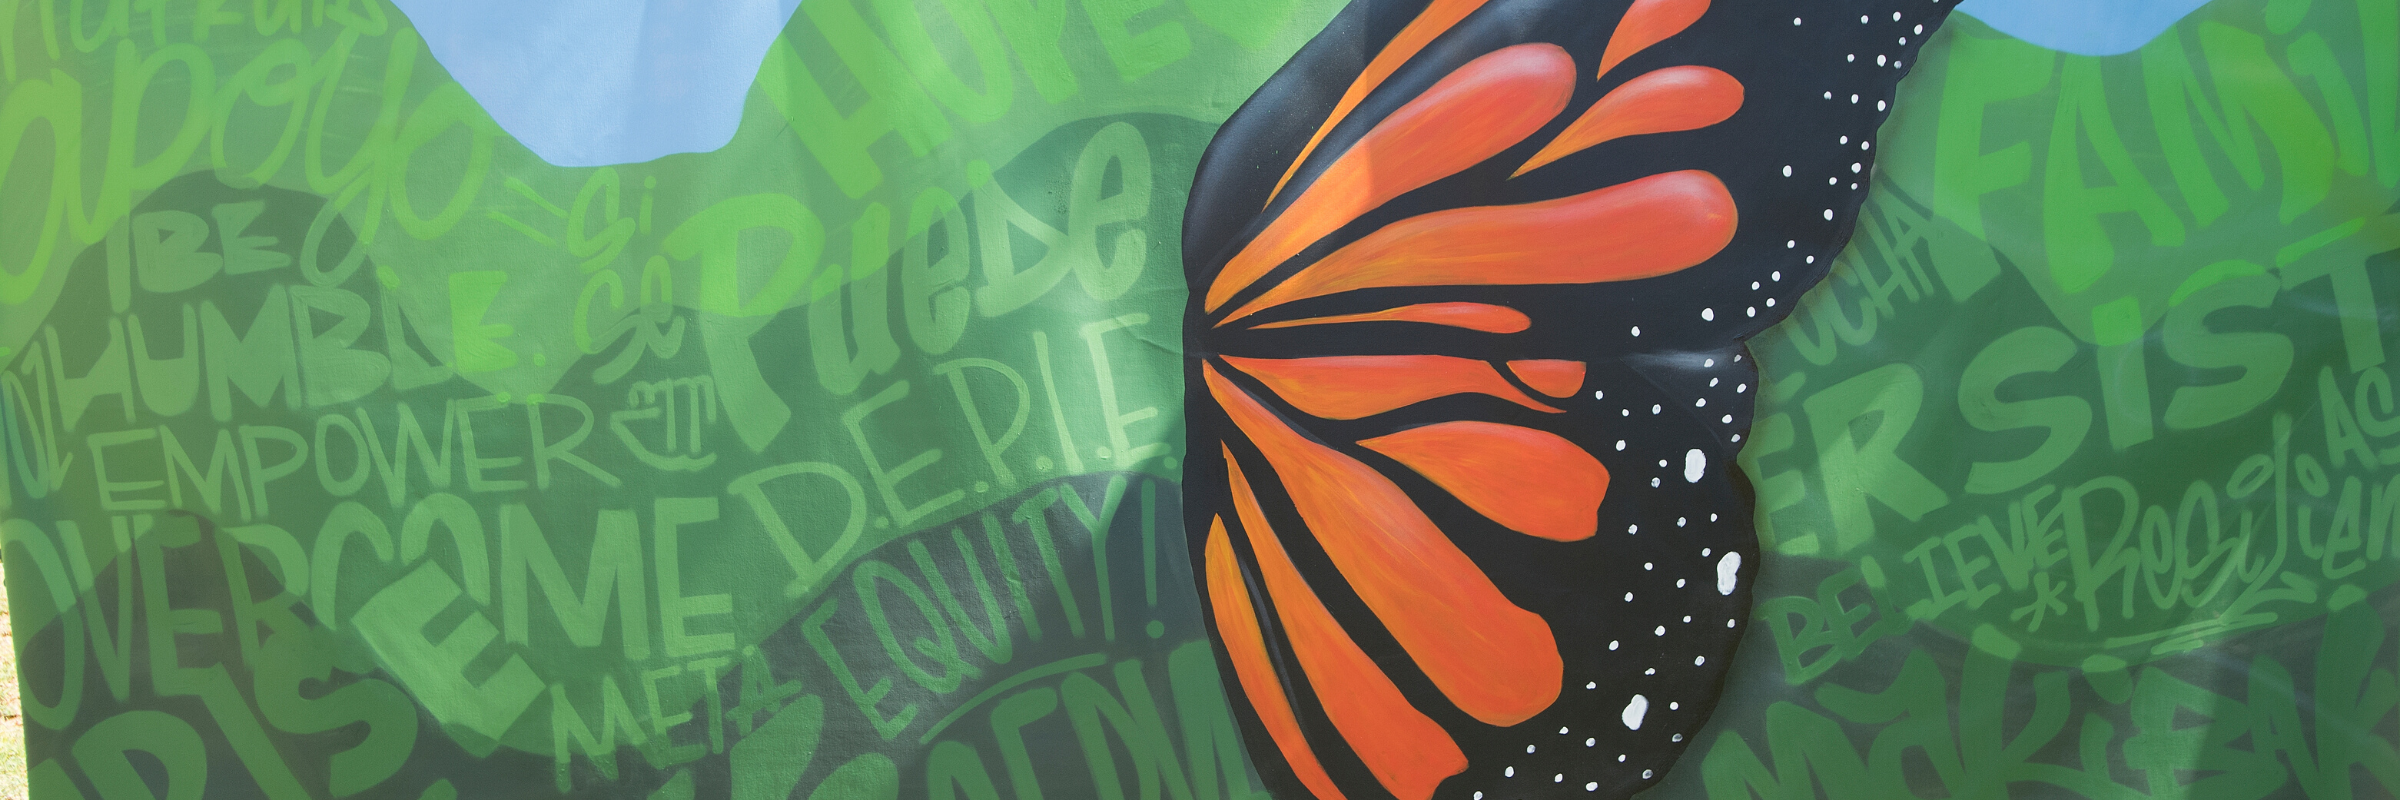 Mural created for undocumented students, including words of solidarity and a butterfly